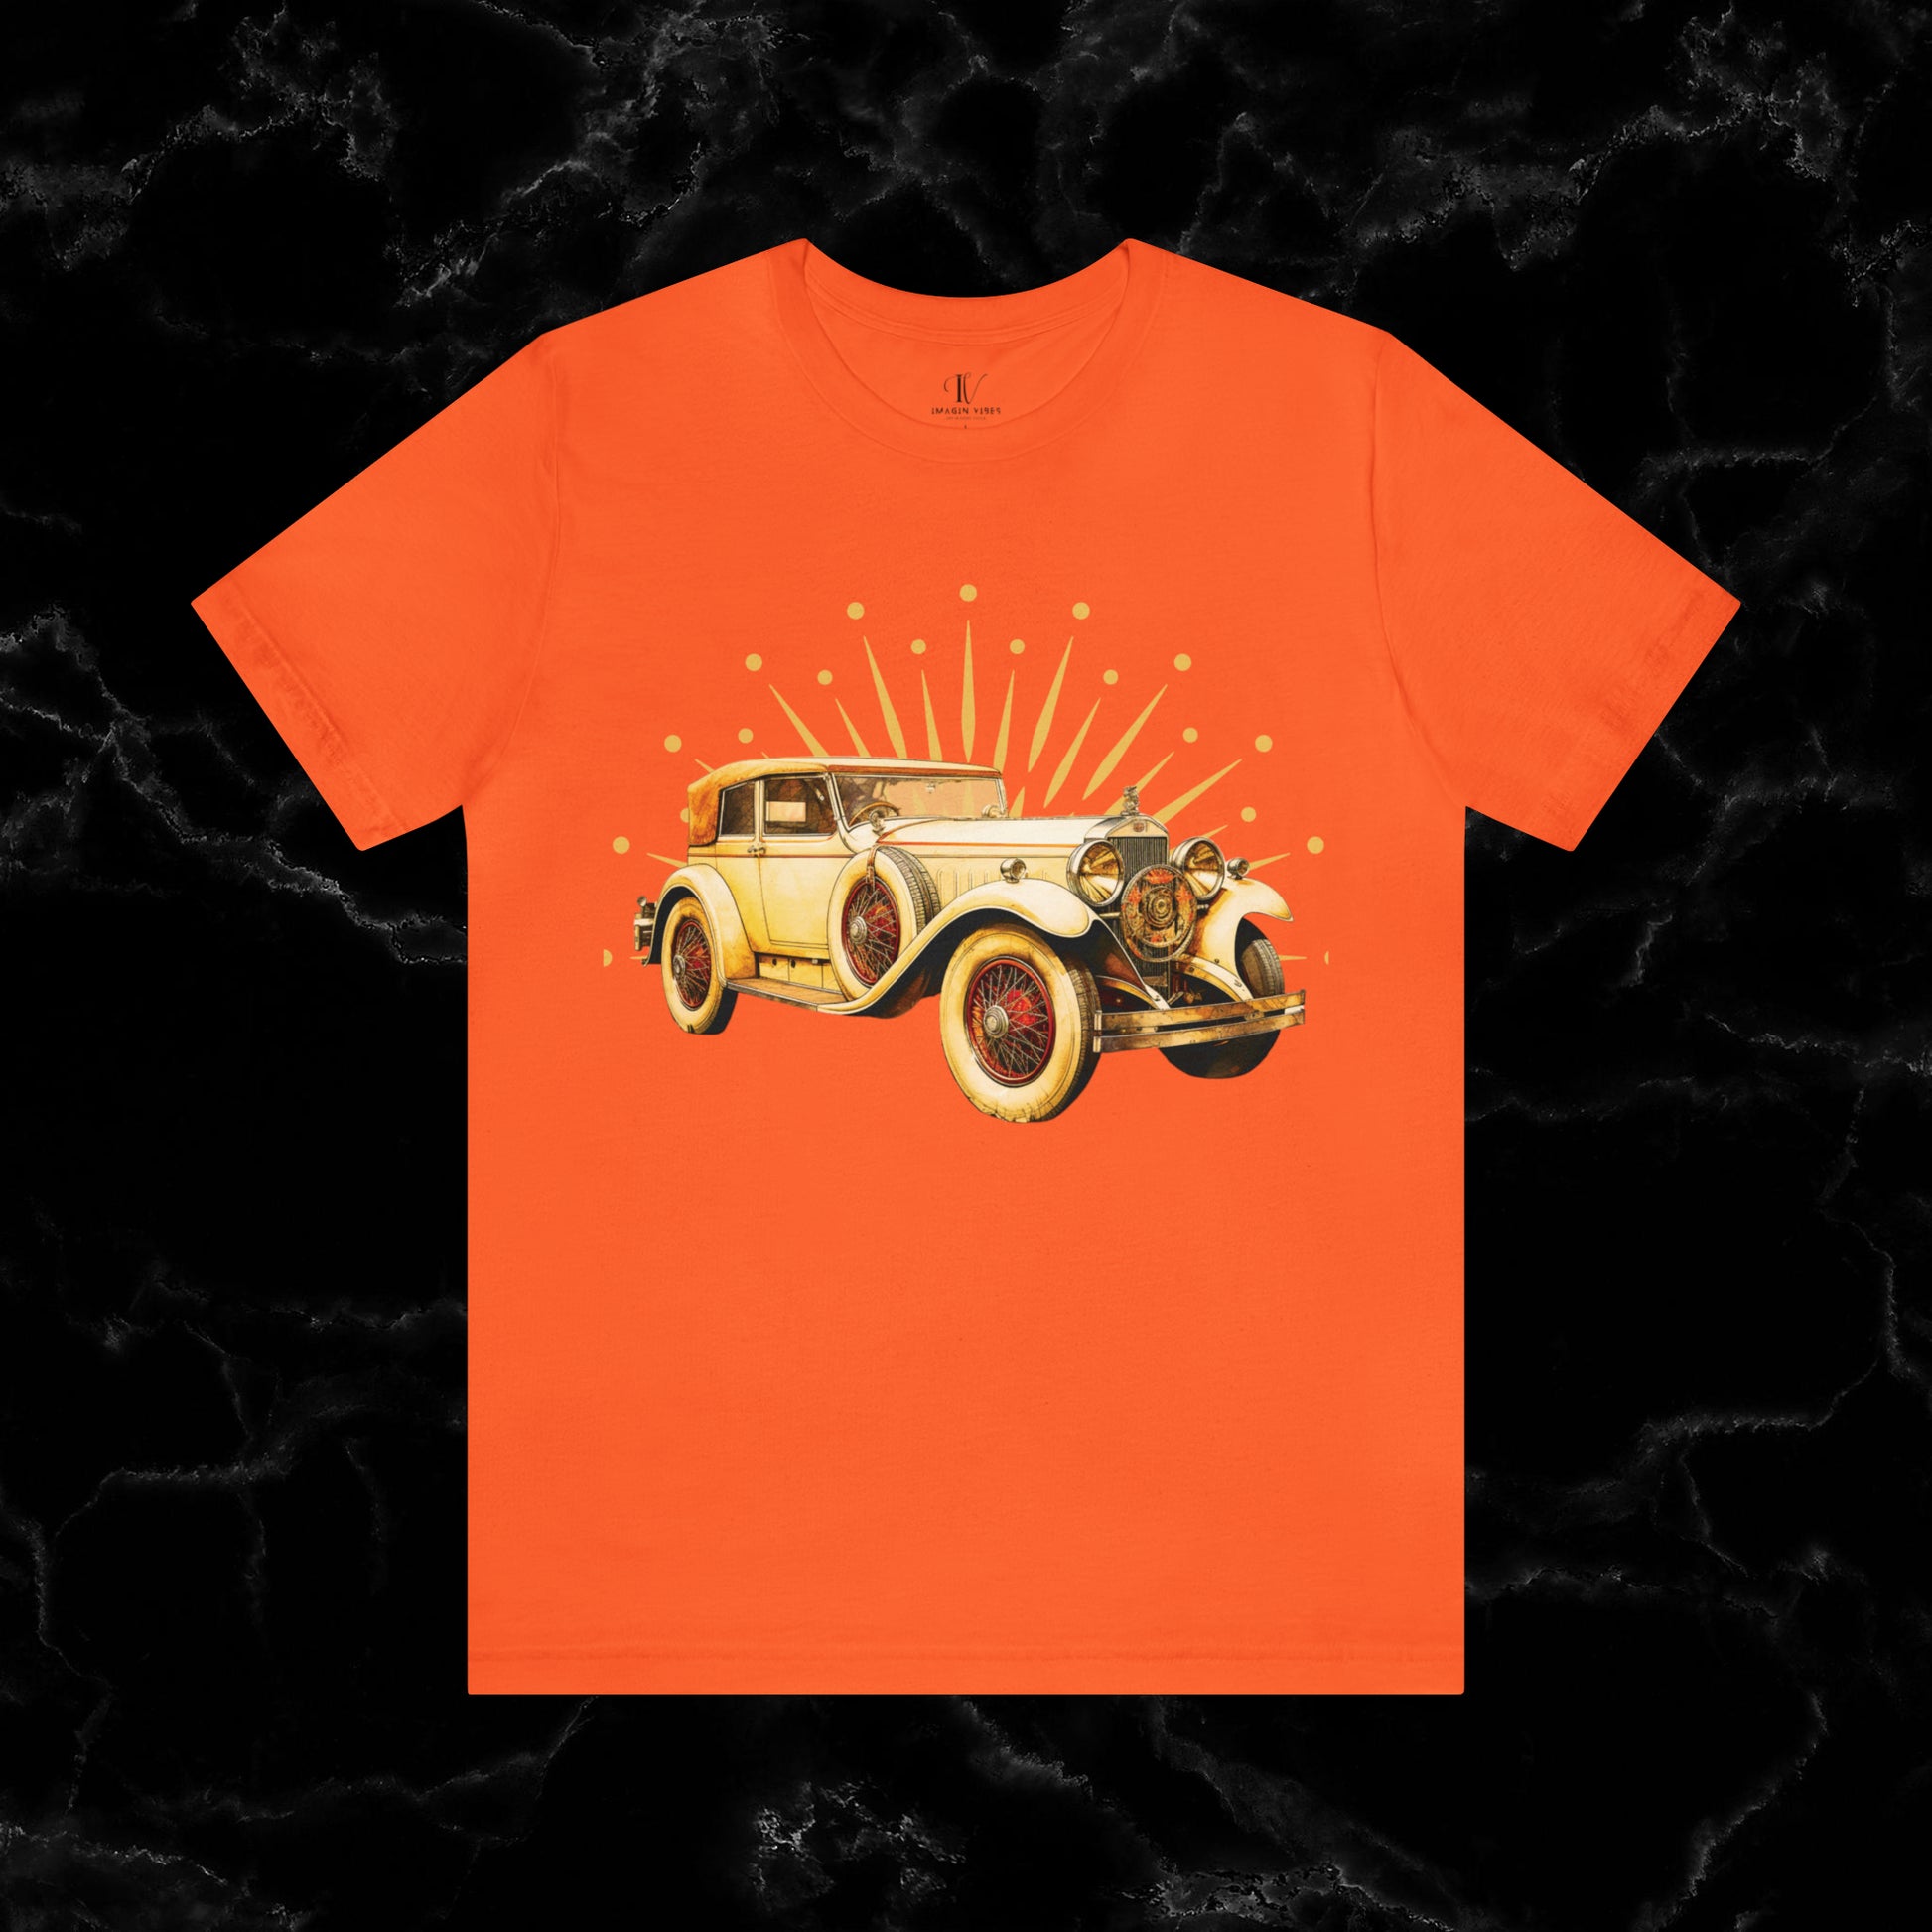 Vintage Car Enthusiast T-Shirt with Classic Wheels and Timeless Appeal T-Shirt Orange S 